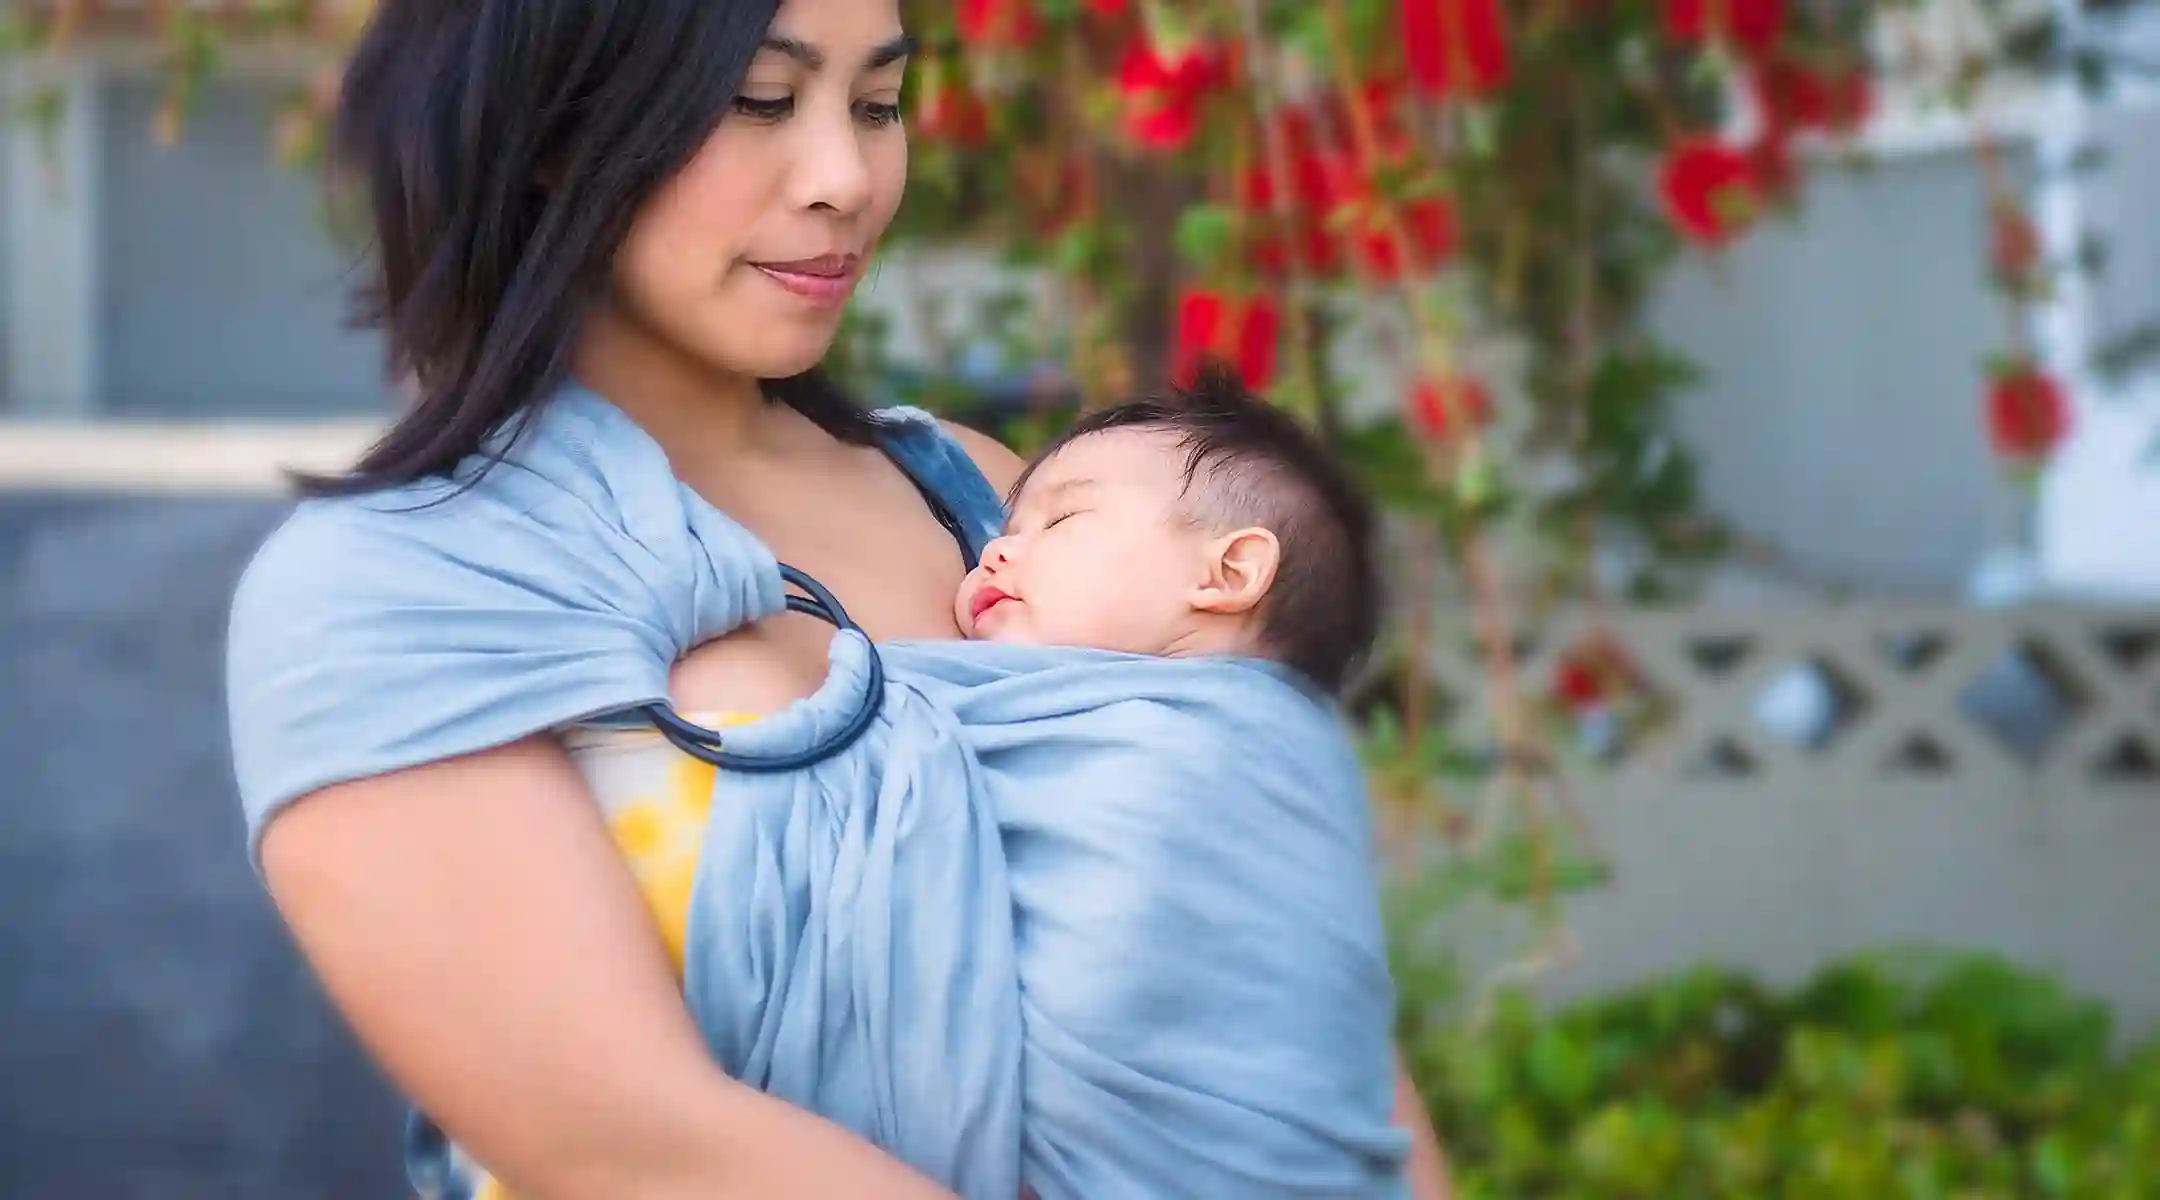 Ring Sling Baby Carrier